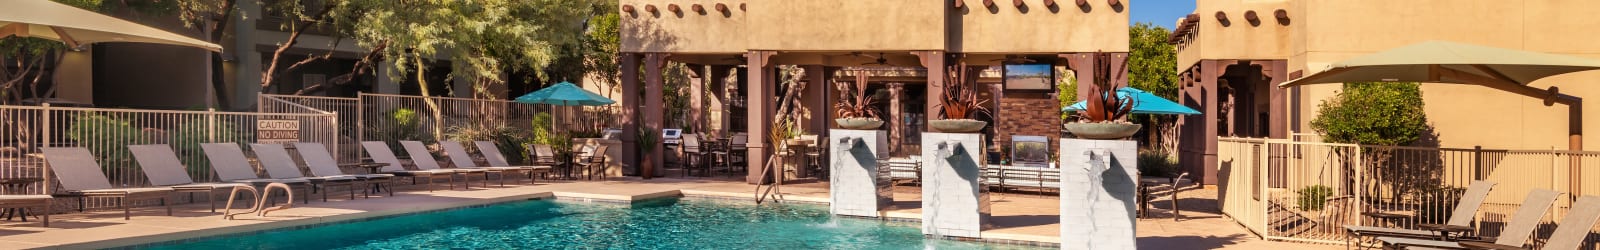 Schedule a tour at Las Colinas at Black Canyon in Phoenix, Arizona